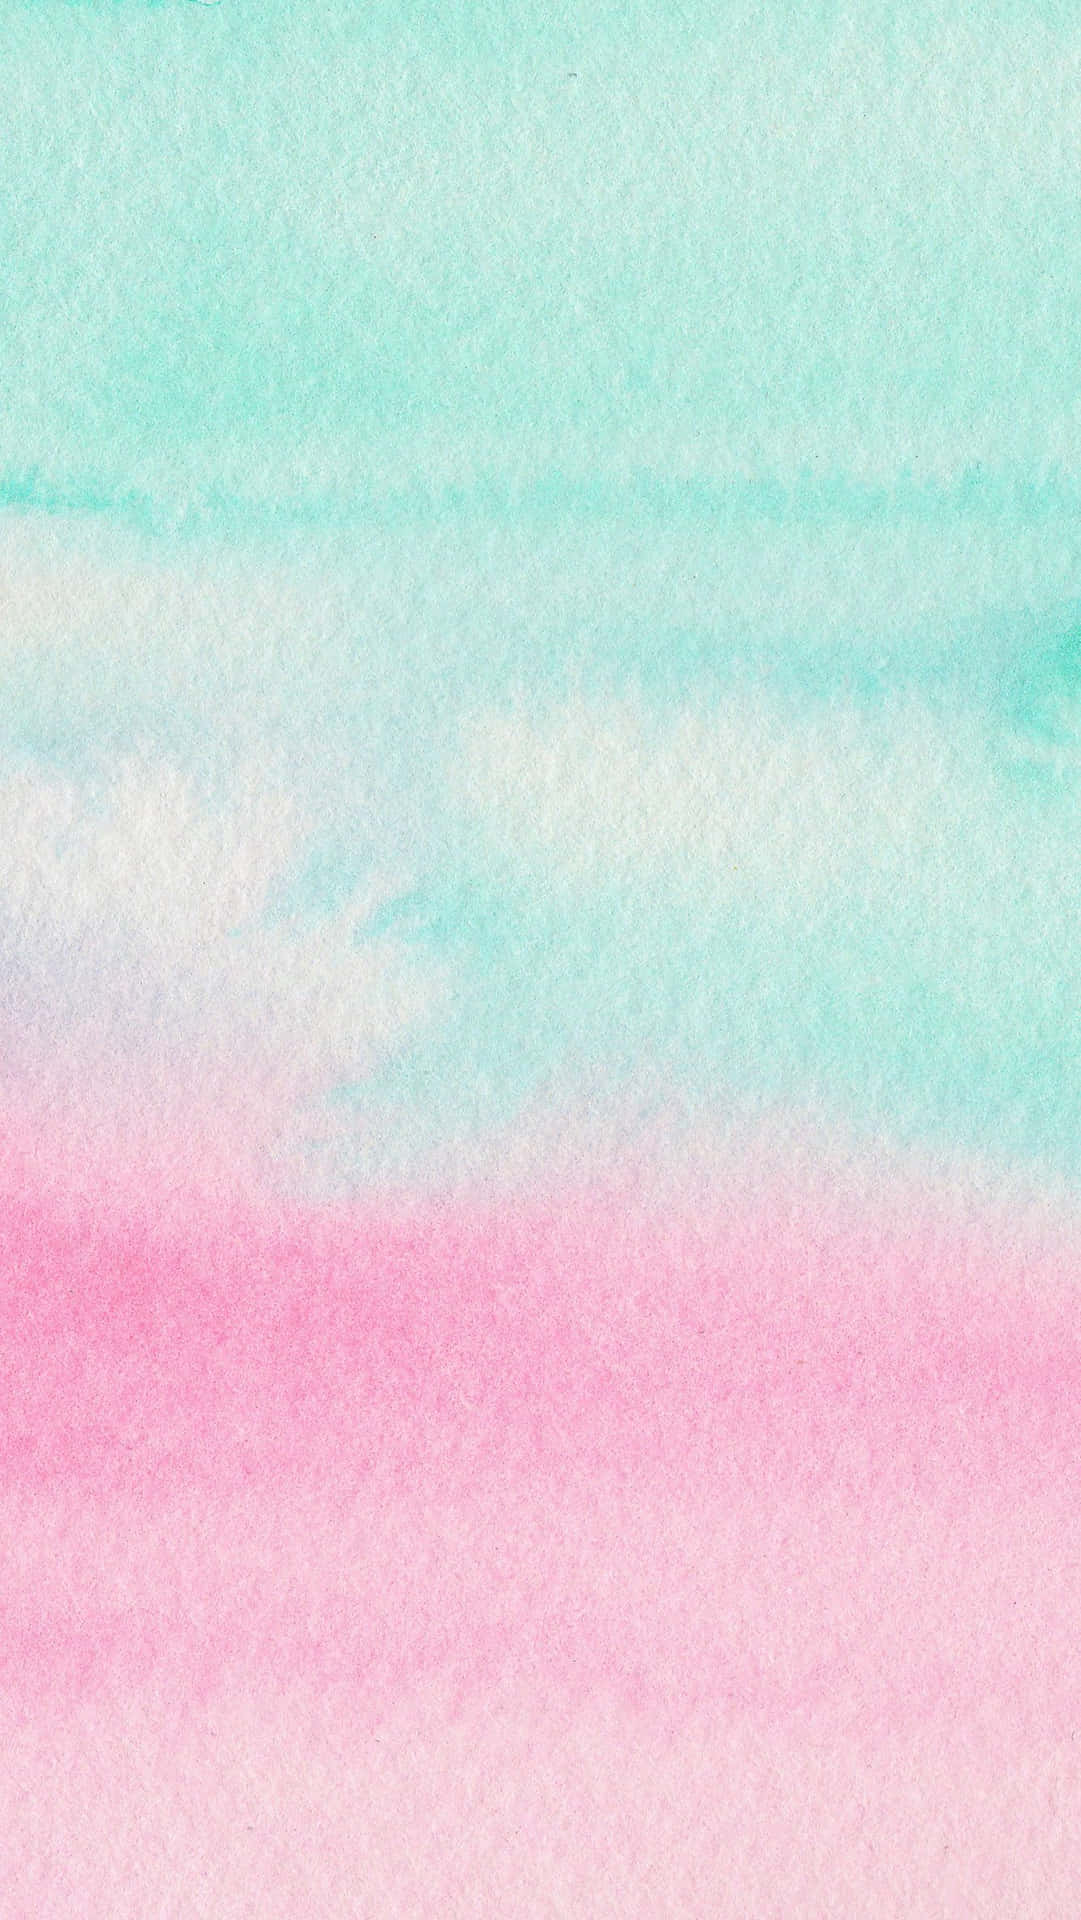 Clear Border Blue Watercolor Background